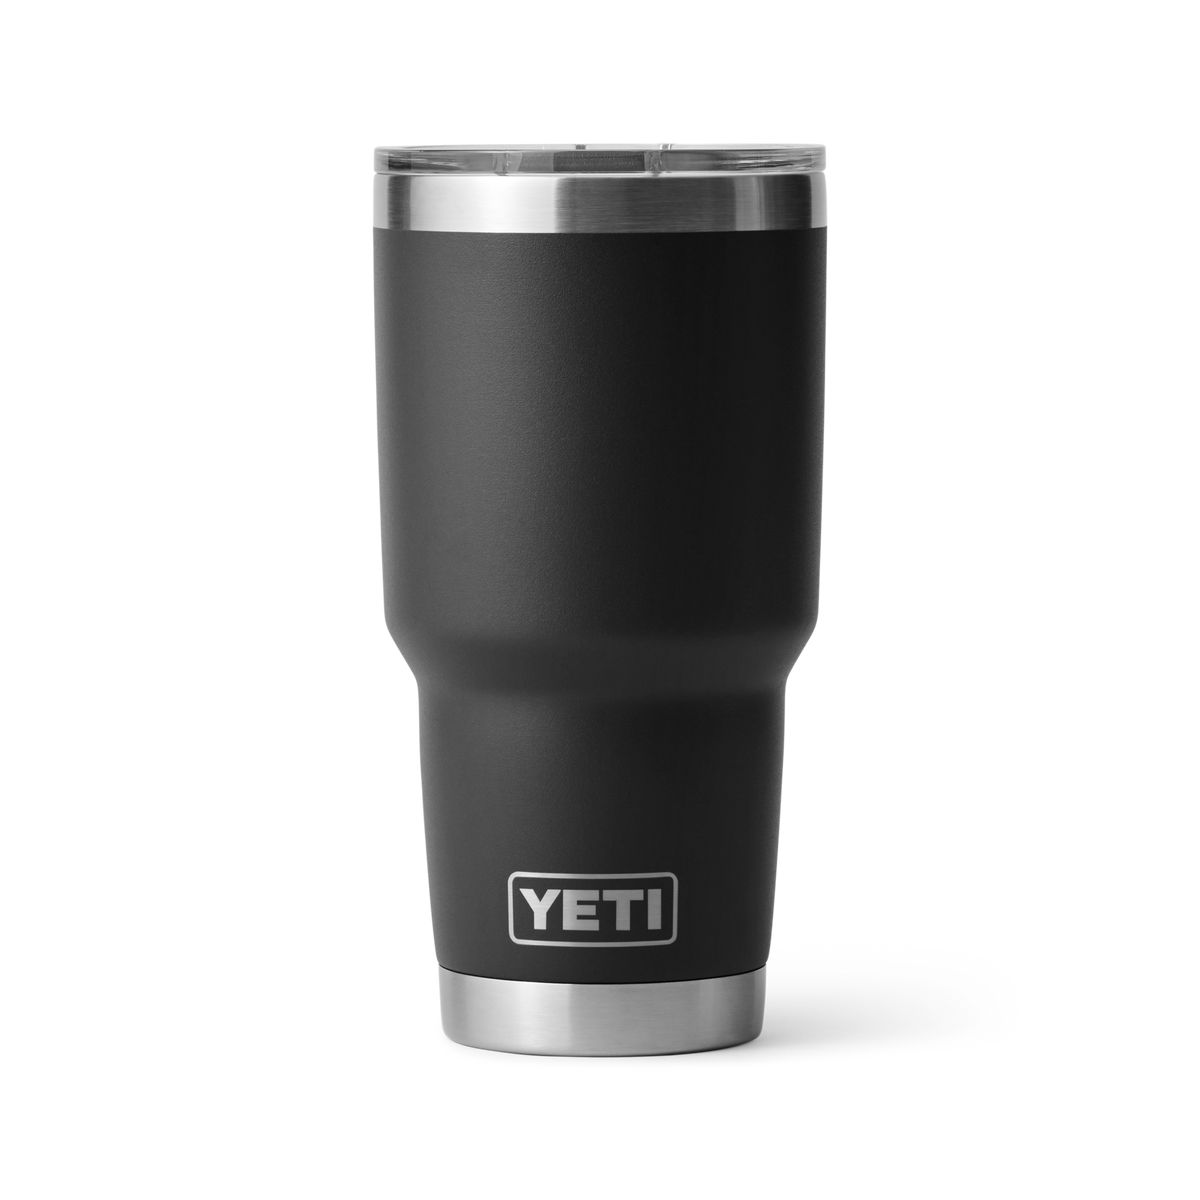 YETI Rambler 30 oz Stainless Steel Vacuum Insulated Tumbler with Lid / Black